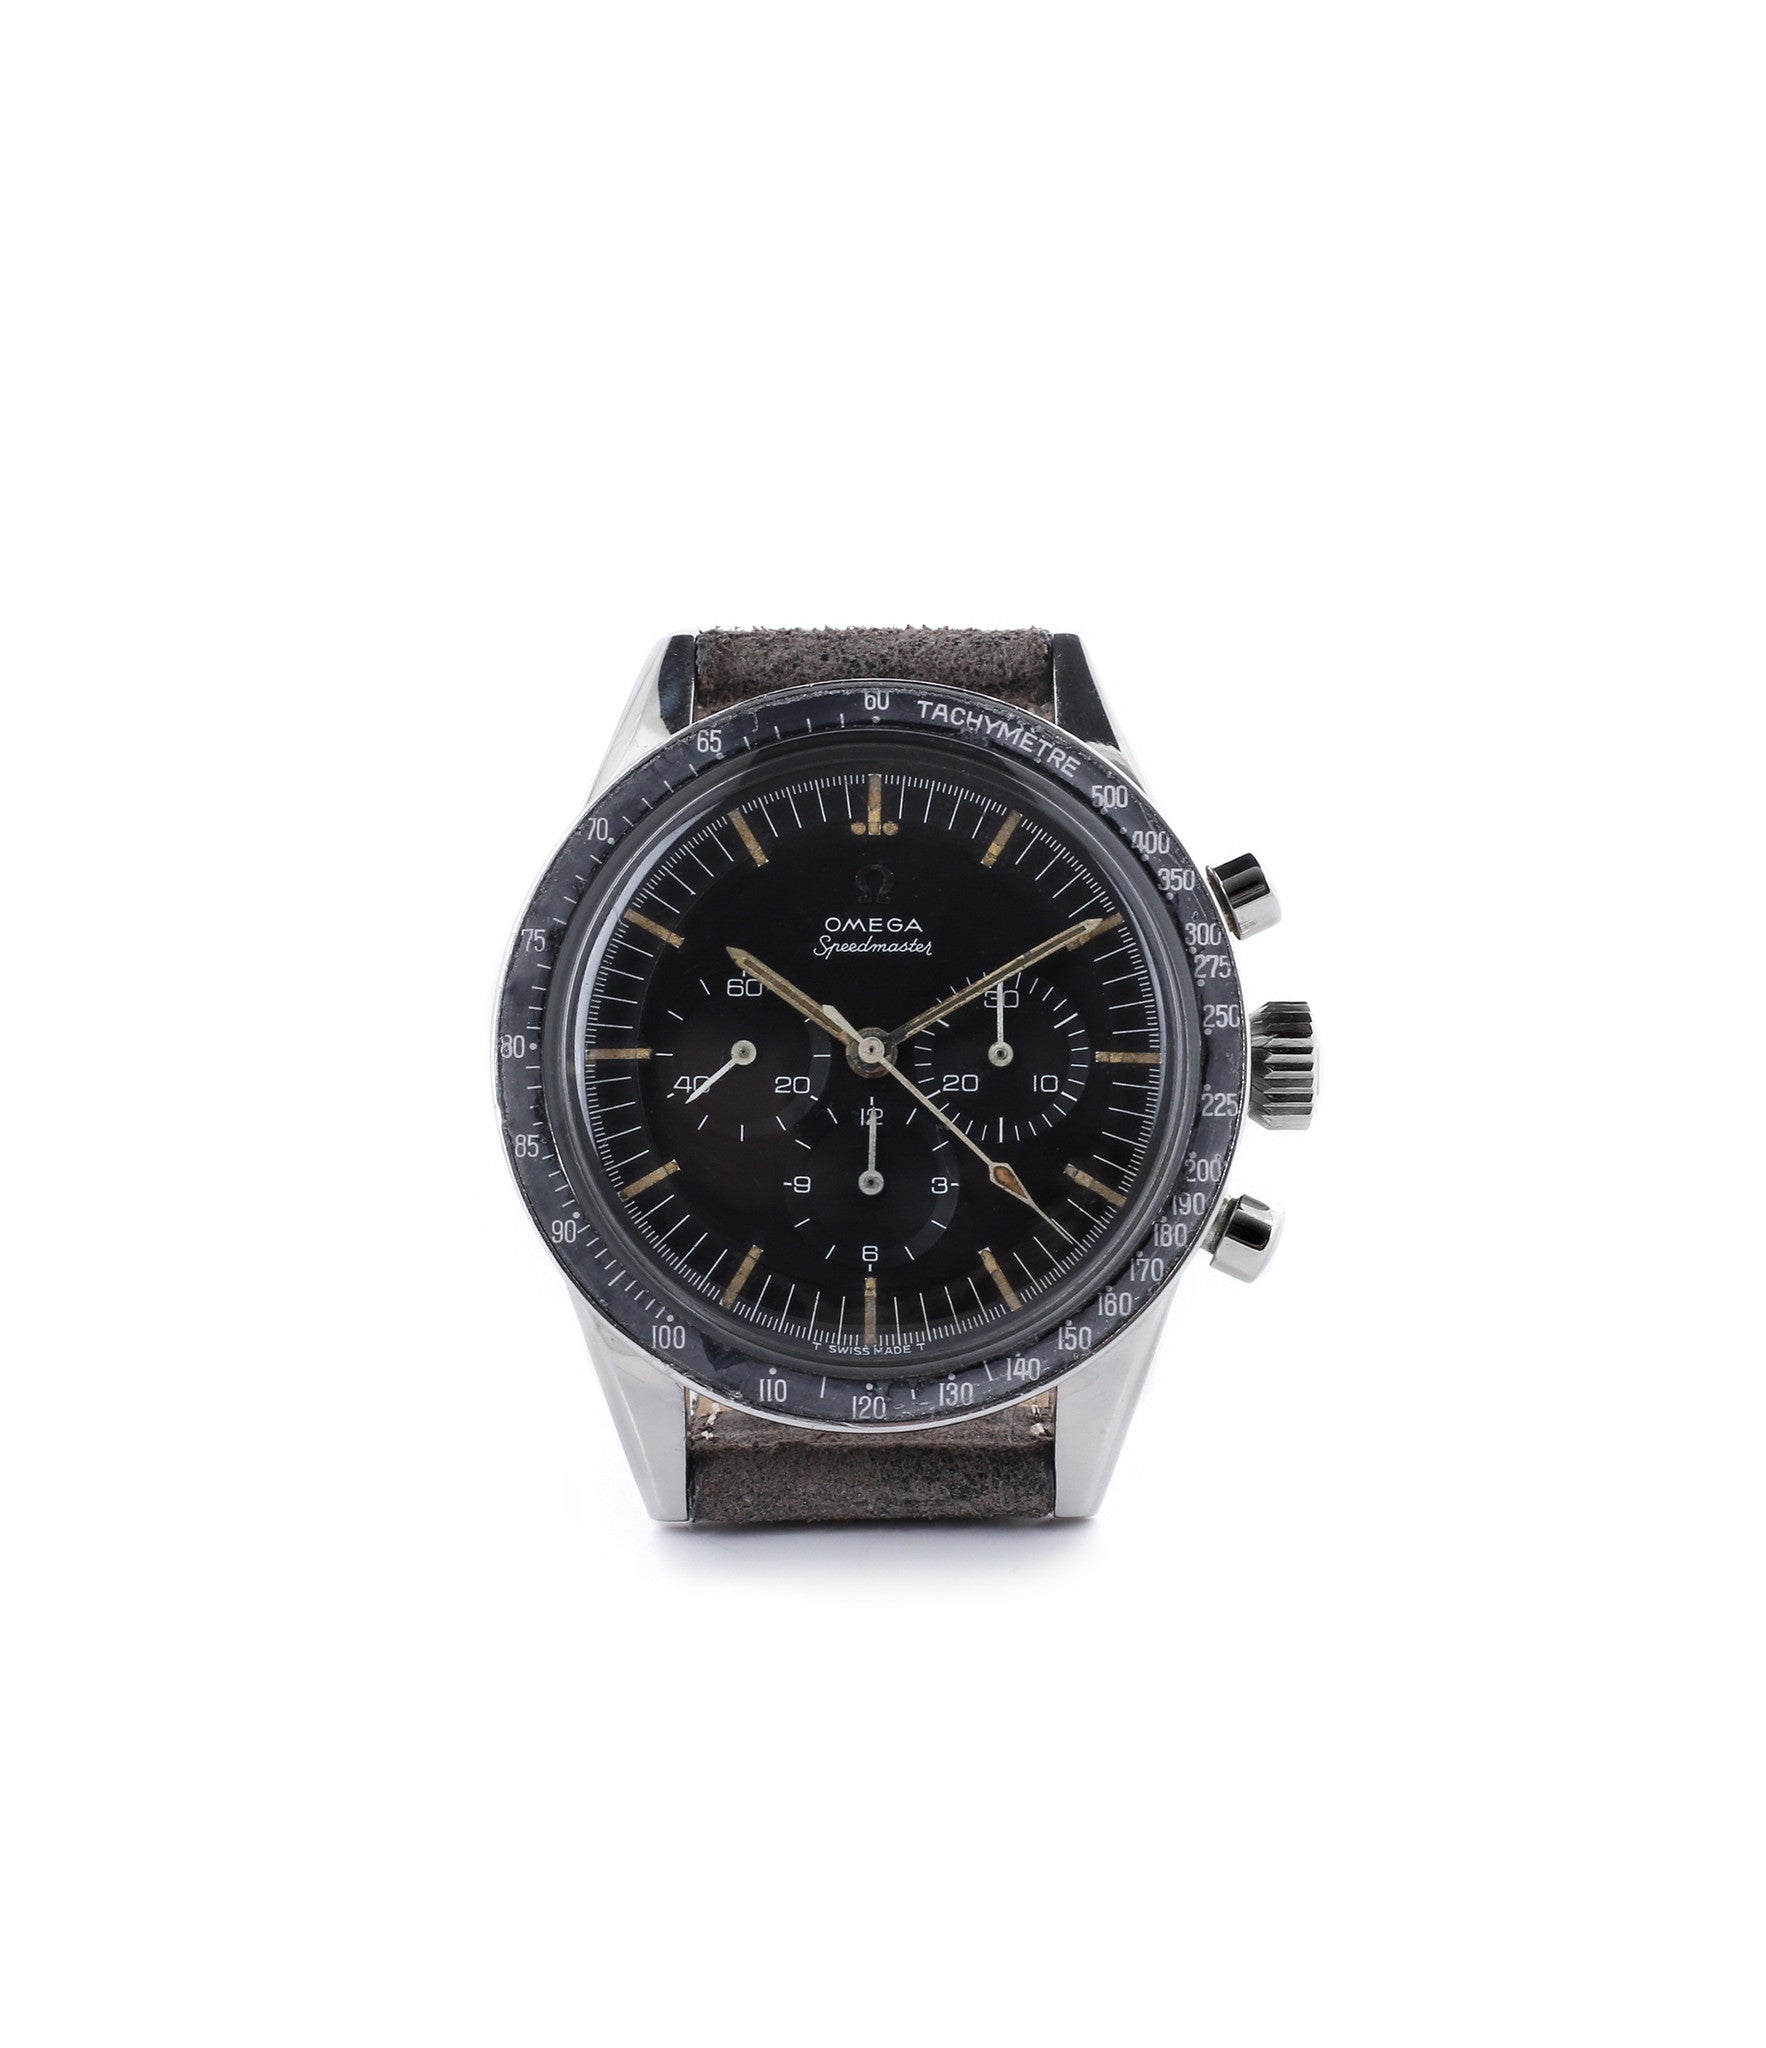 buy vintage Omega Speedmaster Pre-Professional Ed White ST 105.003 steel manual-winding chronograph watch black dial at WATCH XCHANGE LONDON